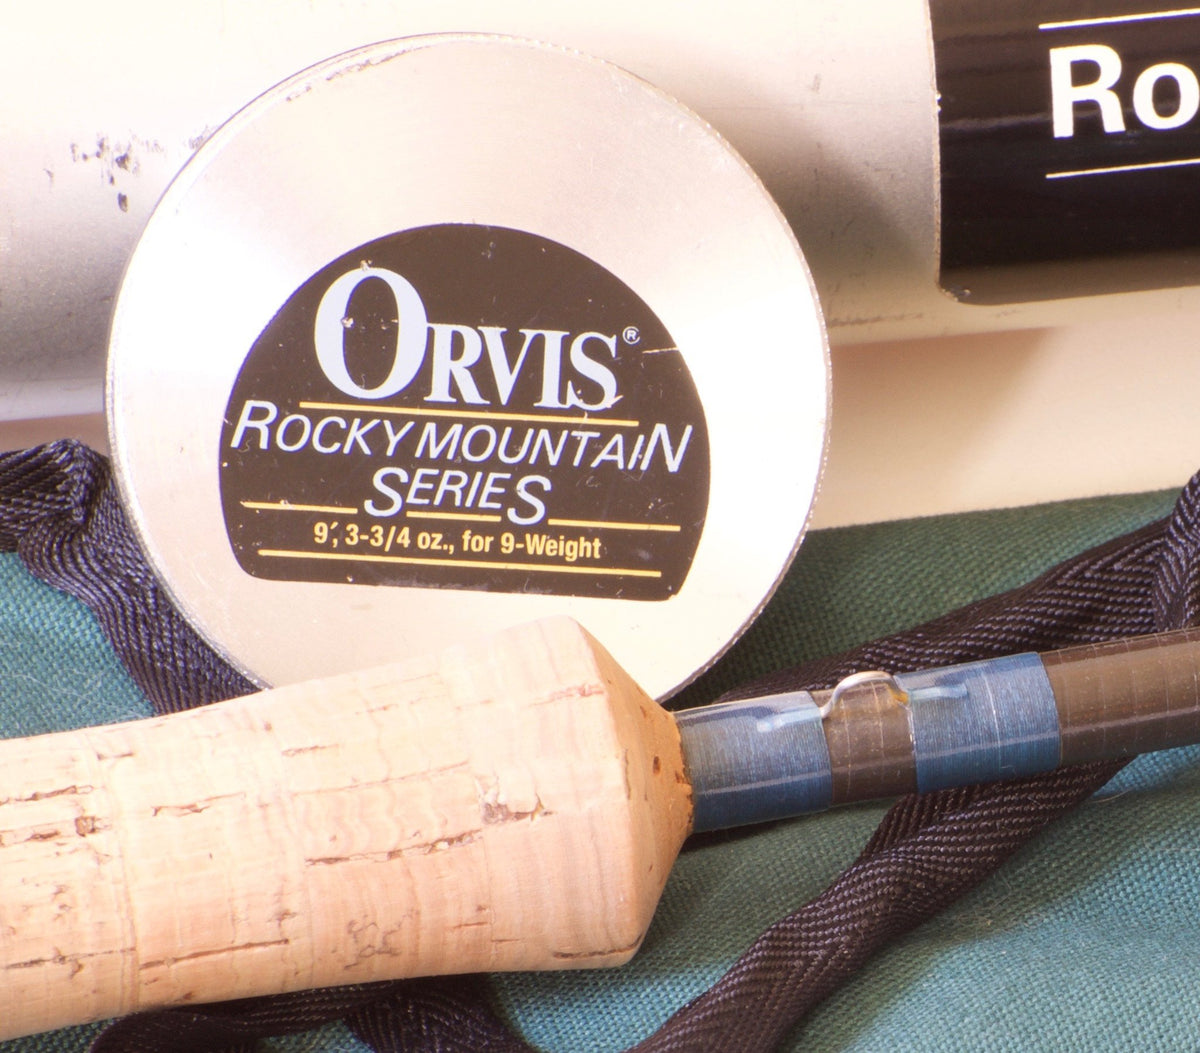 Orvis Rocky Mountain Series 9' 9-weight Fly Rod